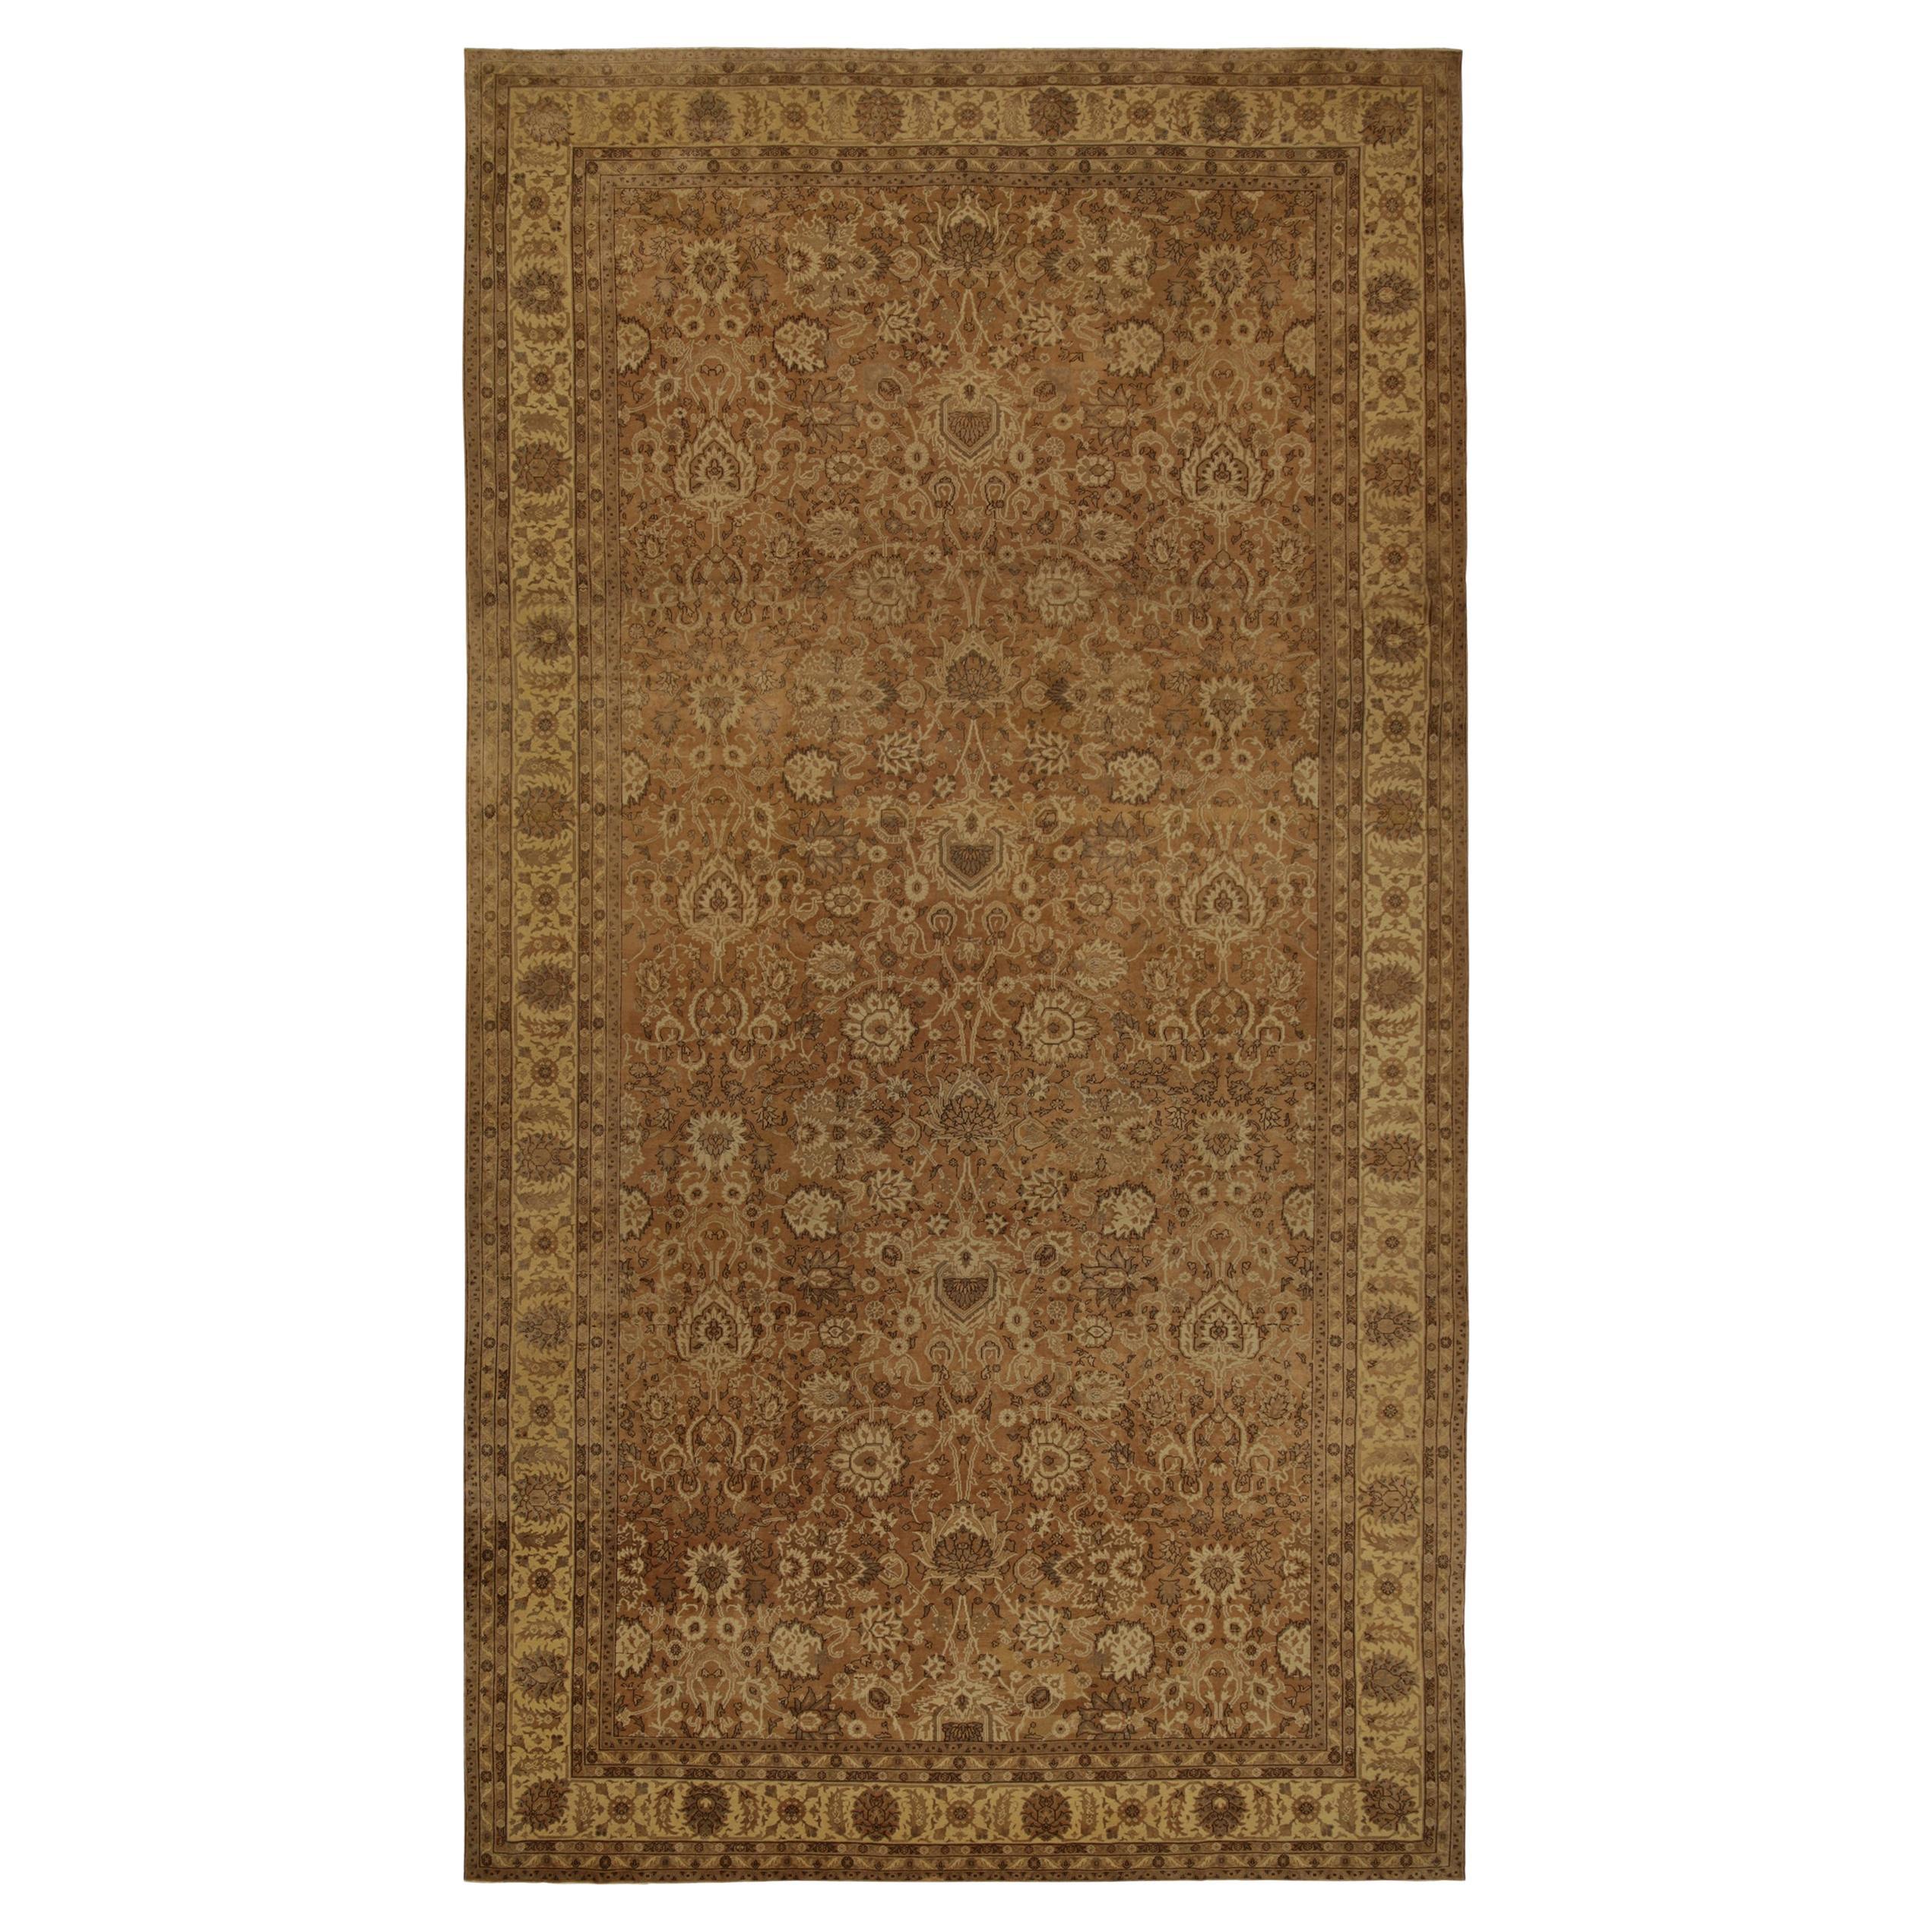 Antique Persian Rug in Beige-Brown and Gold Floral Patterns by Rug & Kilim For Sale